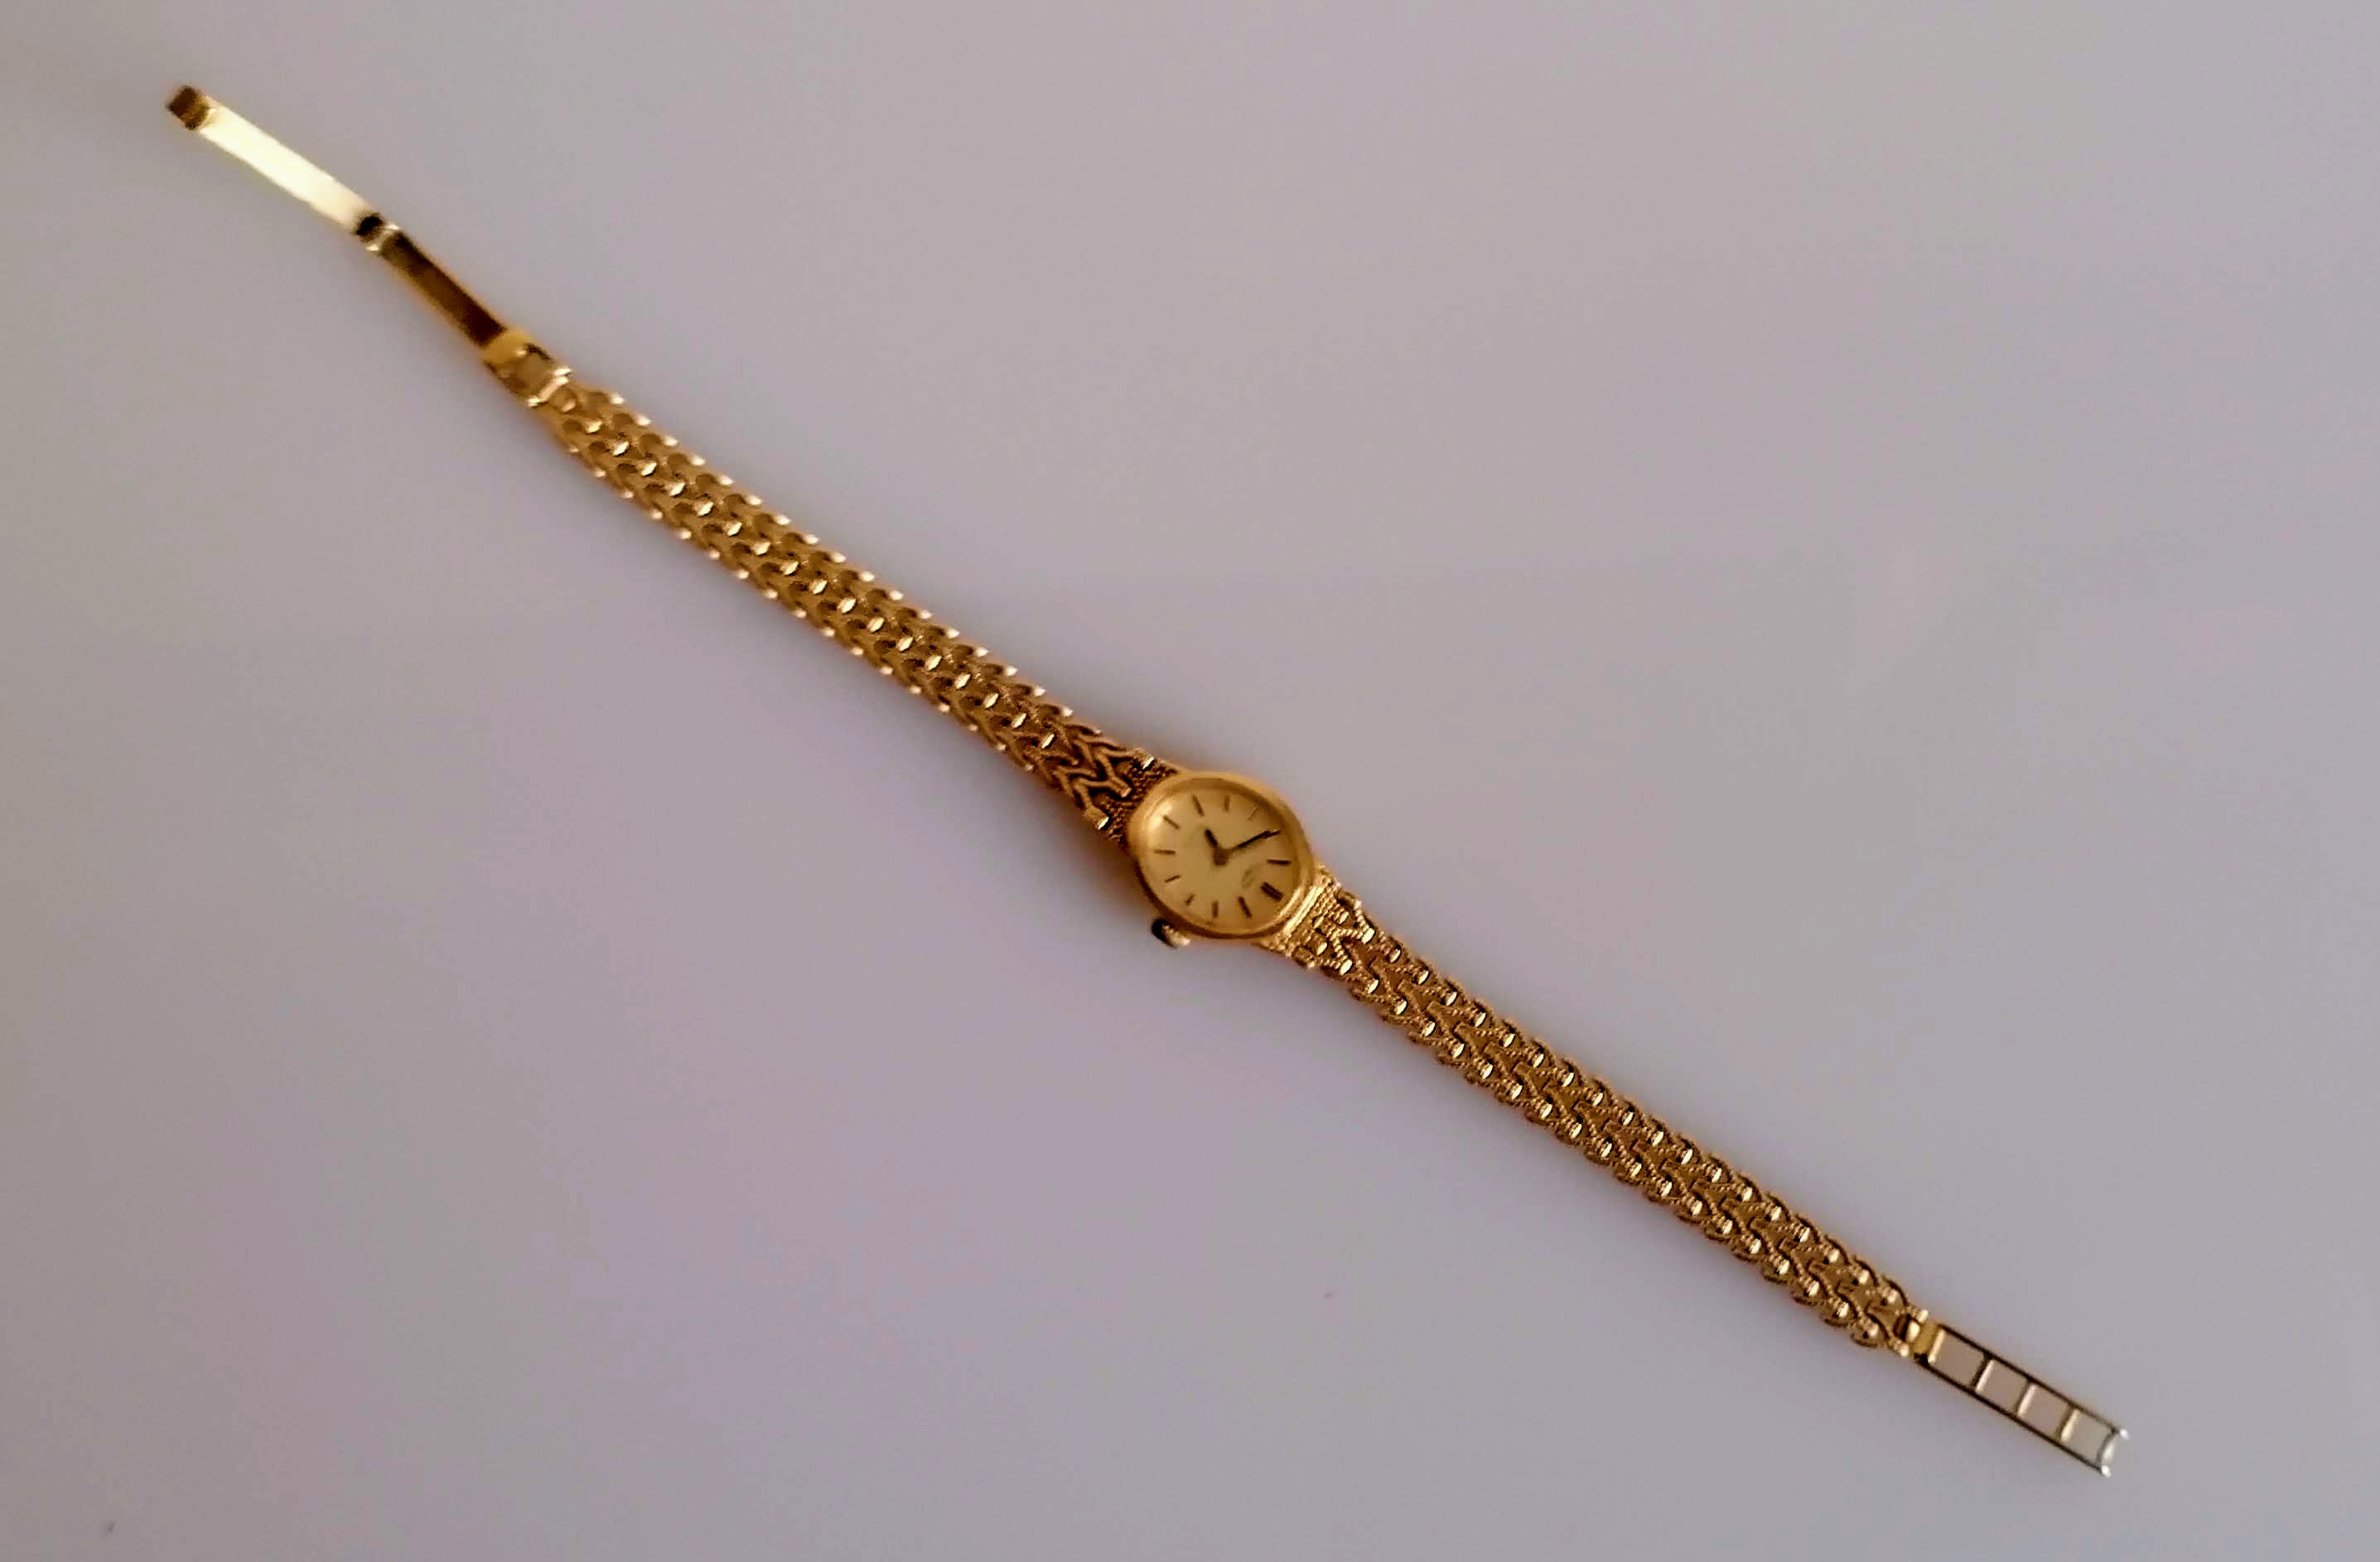 A gold mid-century ladies Rotary dress watch with mesh bracelet, hallmarked 9ct, 10.83g - Image 2 of 3